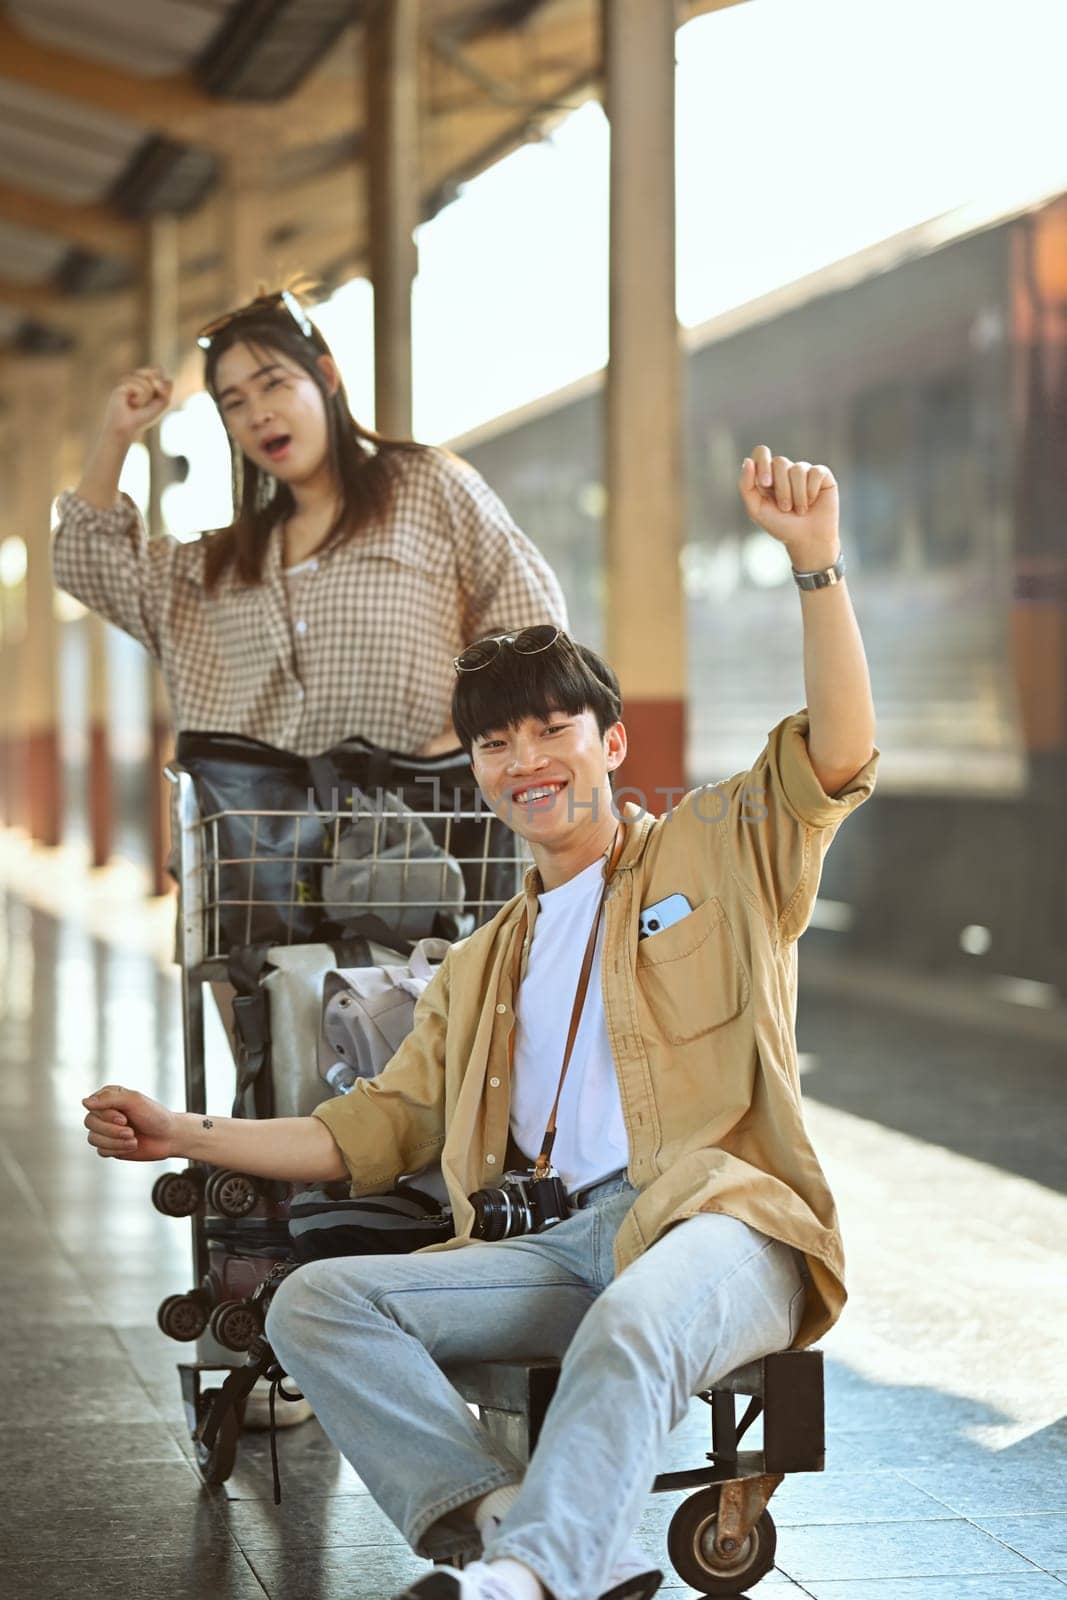 Cheerful young Asian couple arriving at train station while traveling on their vacation. Travel and lifestyle concept